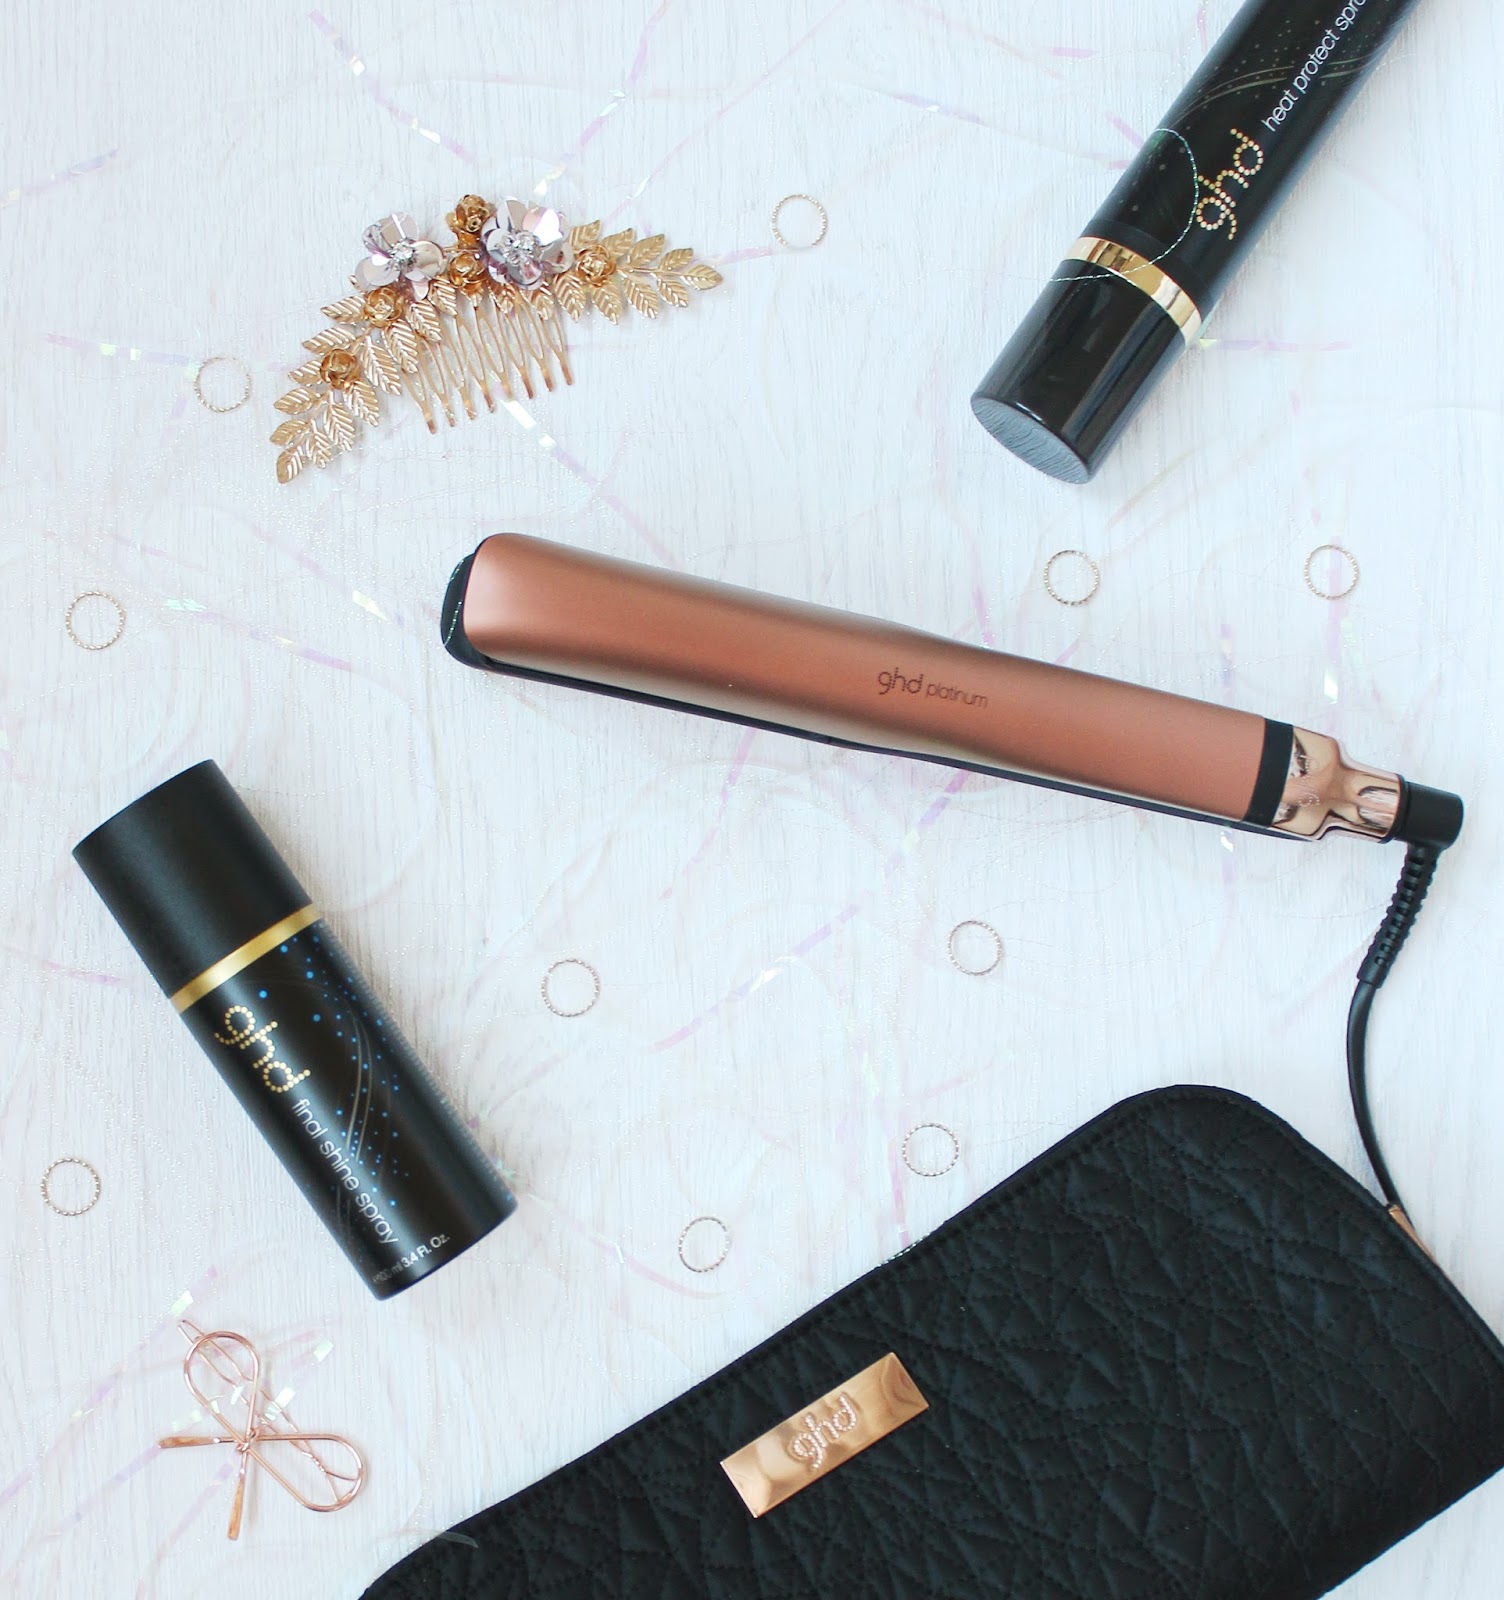 GHD Copper Luxe Platinum Styler review and party hairstyles